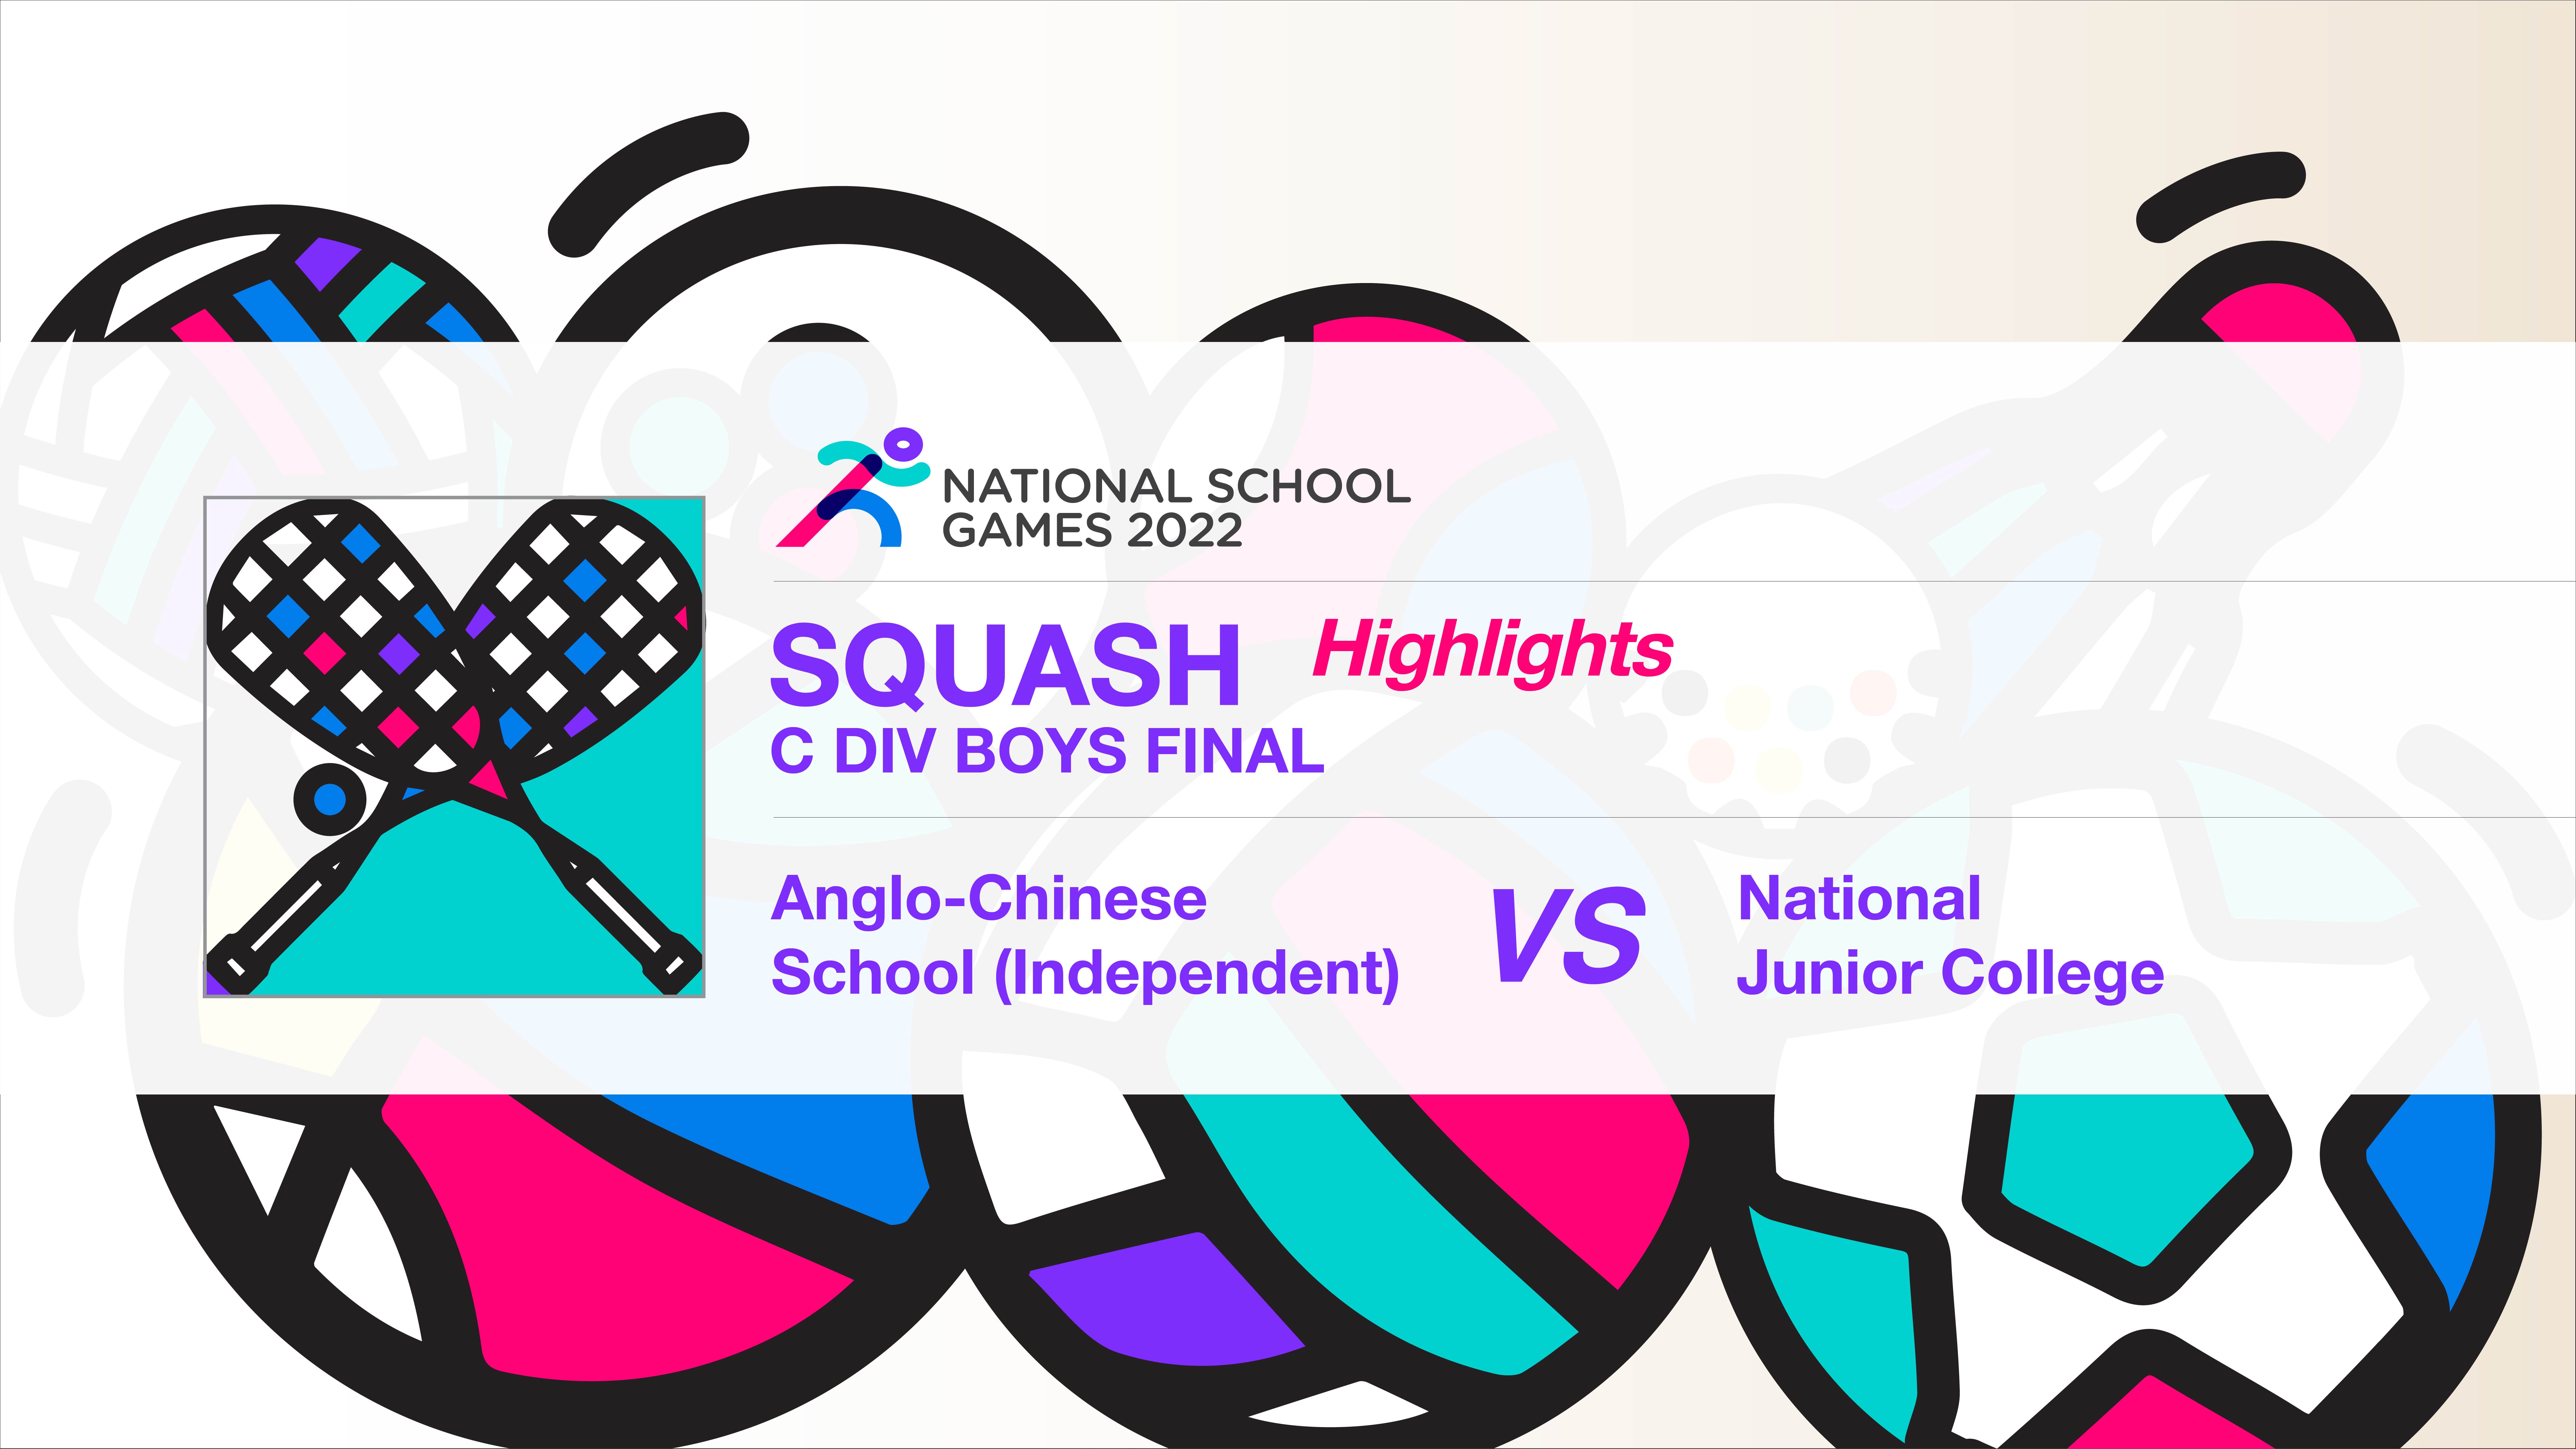 SSSC Squash National C Division Boys Final | Anglo-Chinese School (Independent) vs National Junior College - Highlights